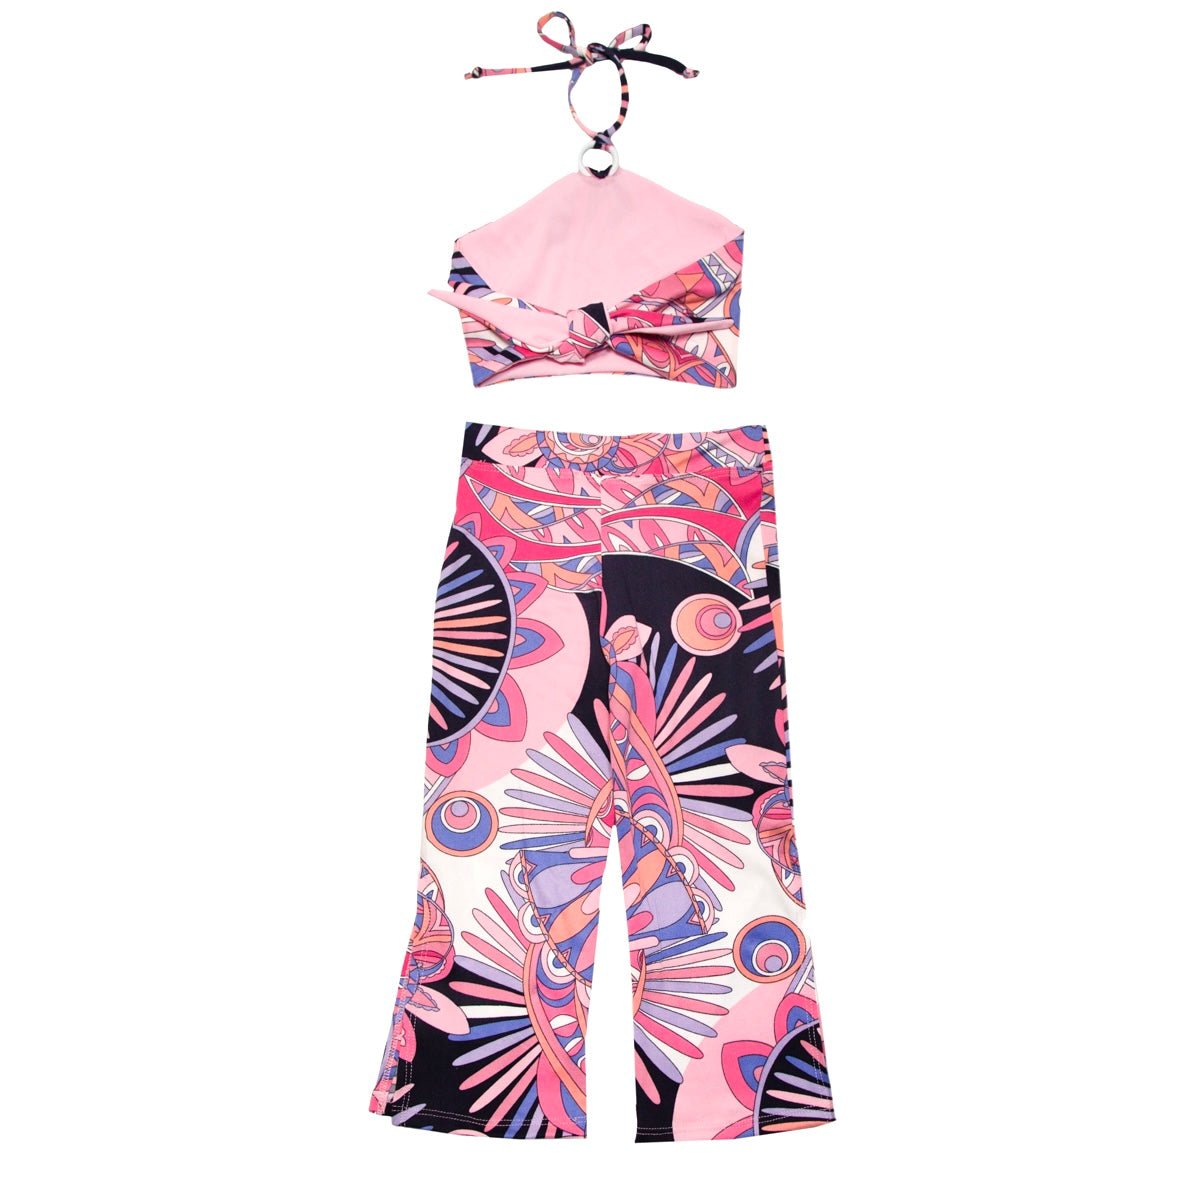 ABSTRACT HALTER TOP AND FLARE SLIT PANTS SET - SET